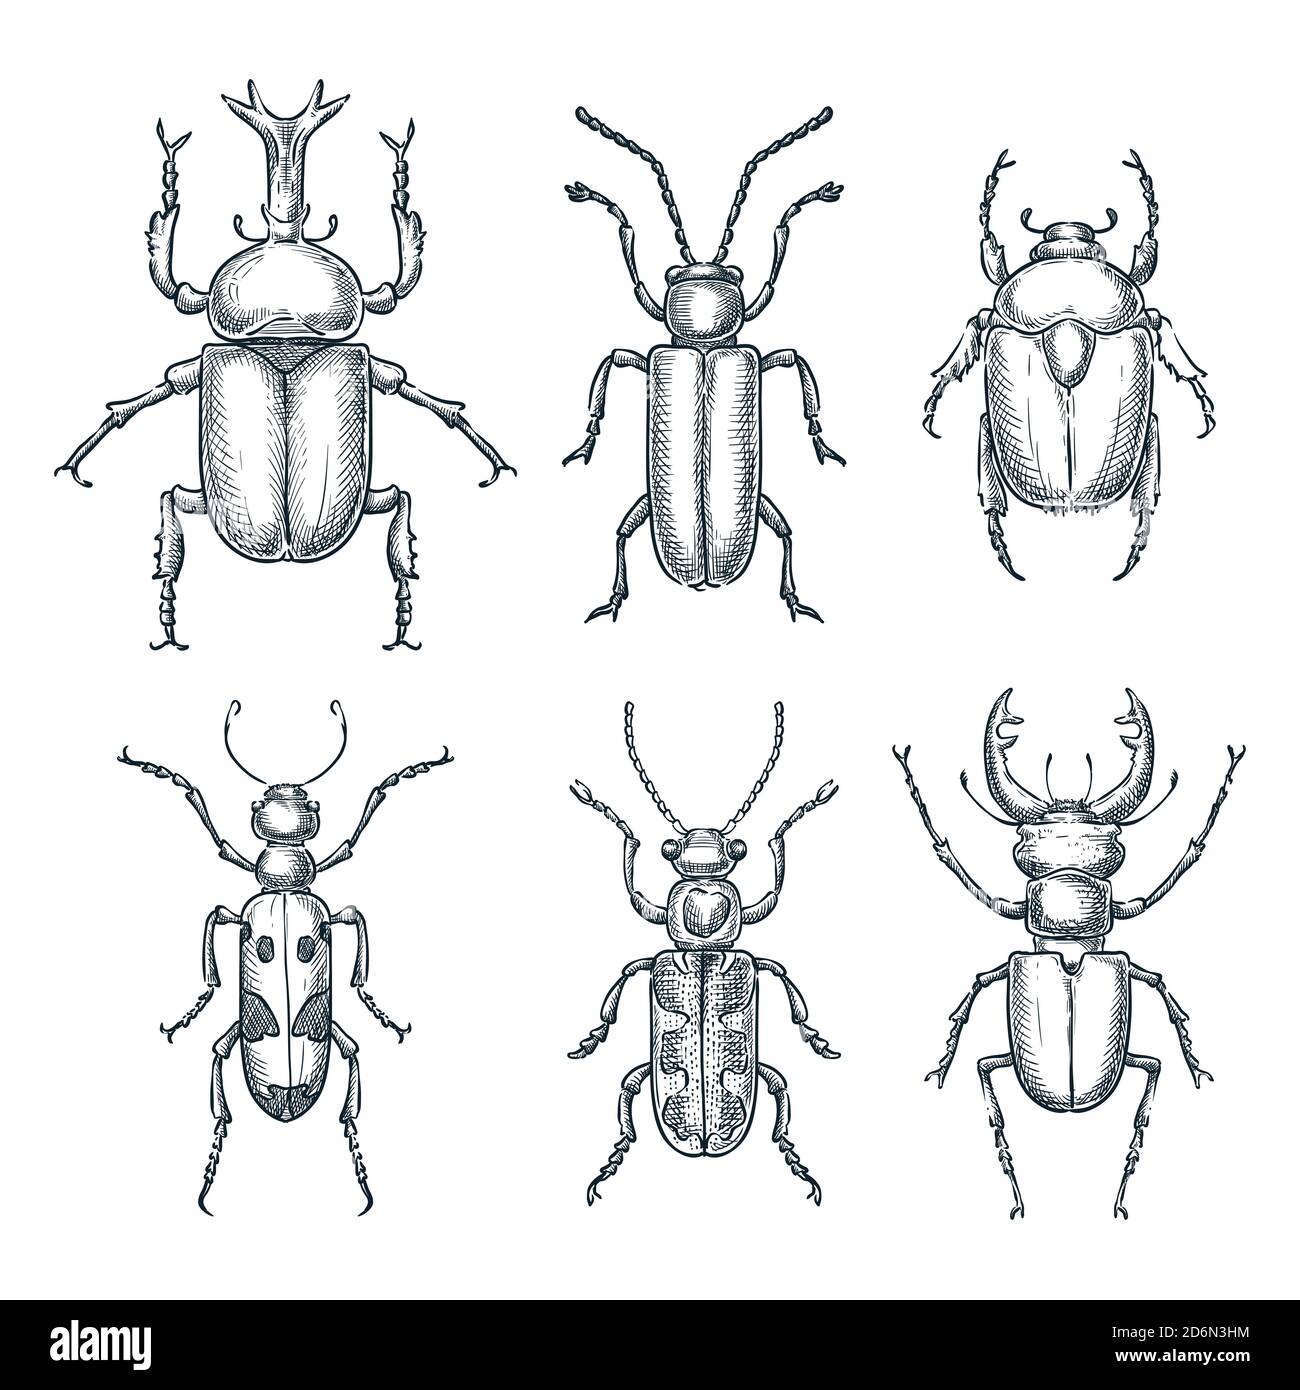 Bugs and beetles set. Vector sketch hand drawn illustration. Insects collection isolated on white background. Stock Vector